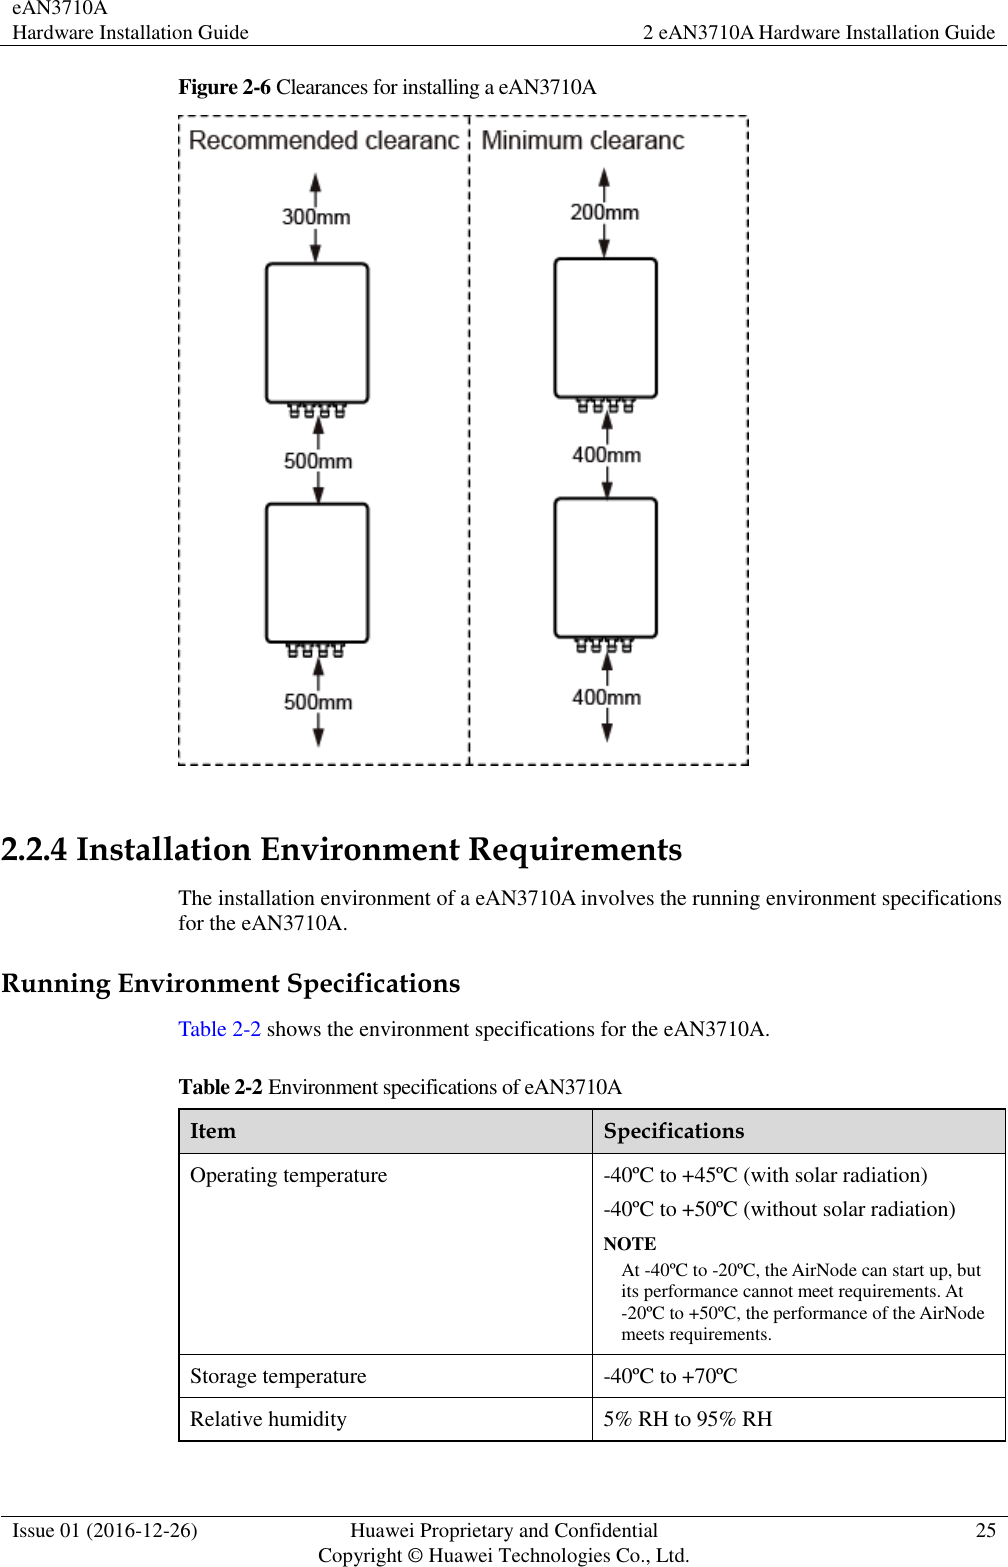 eAN3710A Hardware Installation Guide 2 eAN3710A Hardware Installation Guide  Issue 01 (2016-12-26) Huawei Proprietary and Confidential                                     Copyright © Huawei Technologies Co., Ltd. 25  Figure 2-6 Clearances for installing a eAN3710A   2.2.4 Installation Environment Requirements The installation environment of a eAN3710A involves the running environment specifications for the eAN3710A. Running Environment Specifications Table 2-2 shows the environment specifications for the eAN3710A. Table 2-2 Environment specifications of eAN3710A Item Specifications Operating temperature -40ºC to +45ºC (with solar radiation) -40ºC to +50ºC (without solar radiation) NOTE At -40ºC to -20ºC, the AirNode can start up, but its performance cannot meet requirements. At -20ºC to +50ºC, the performance of the AirNode meets requirements. Storage temperature -40ºC to +70ºC Relative humidity 5% RH to 95% RH 